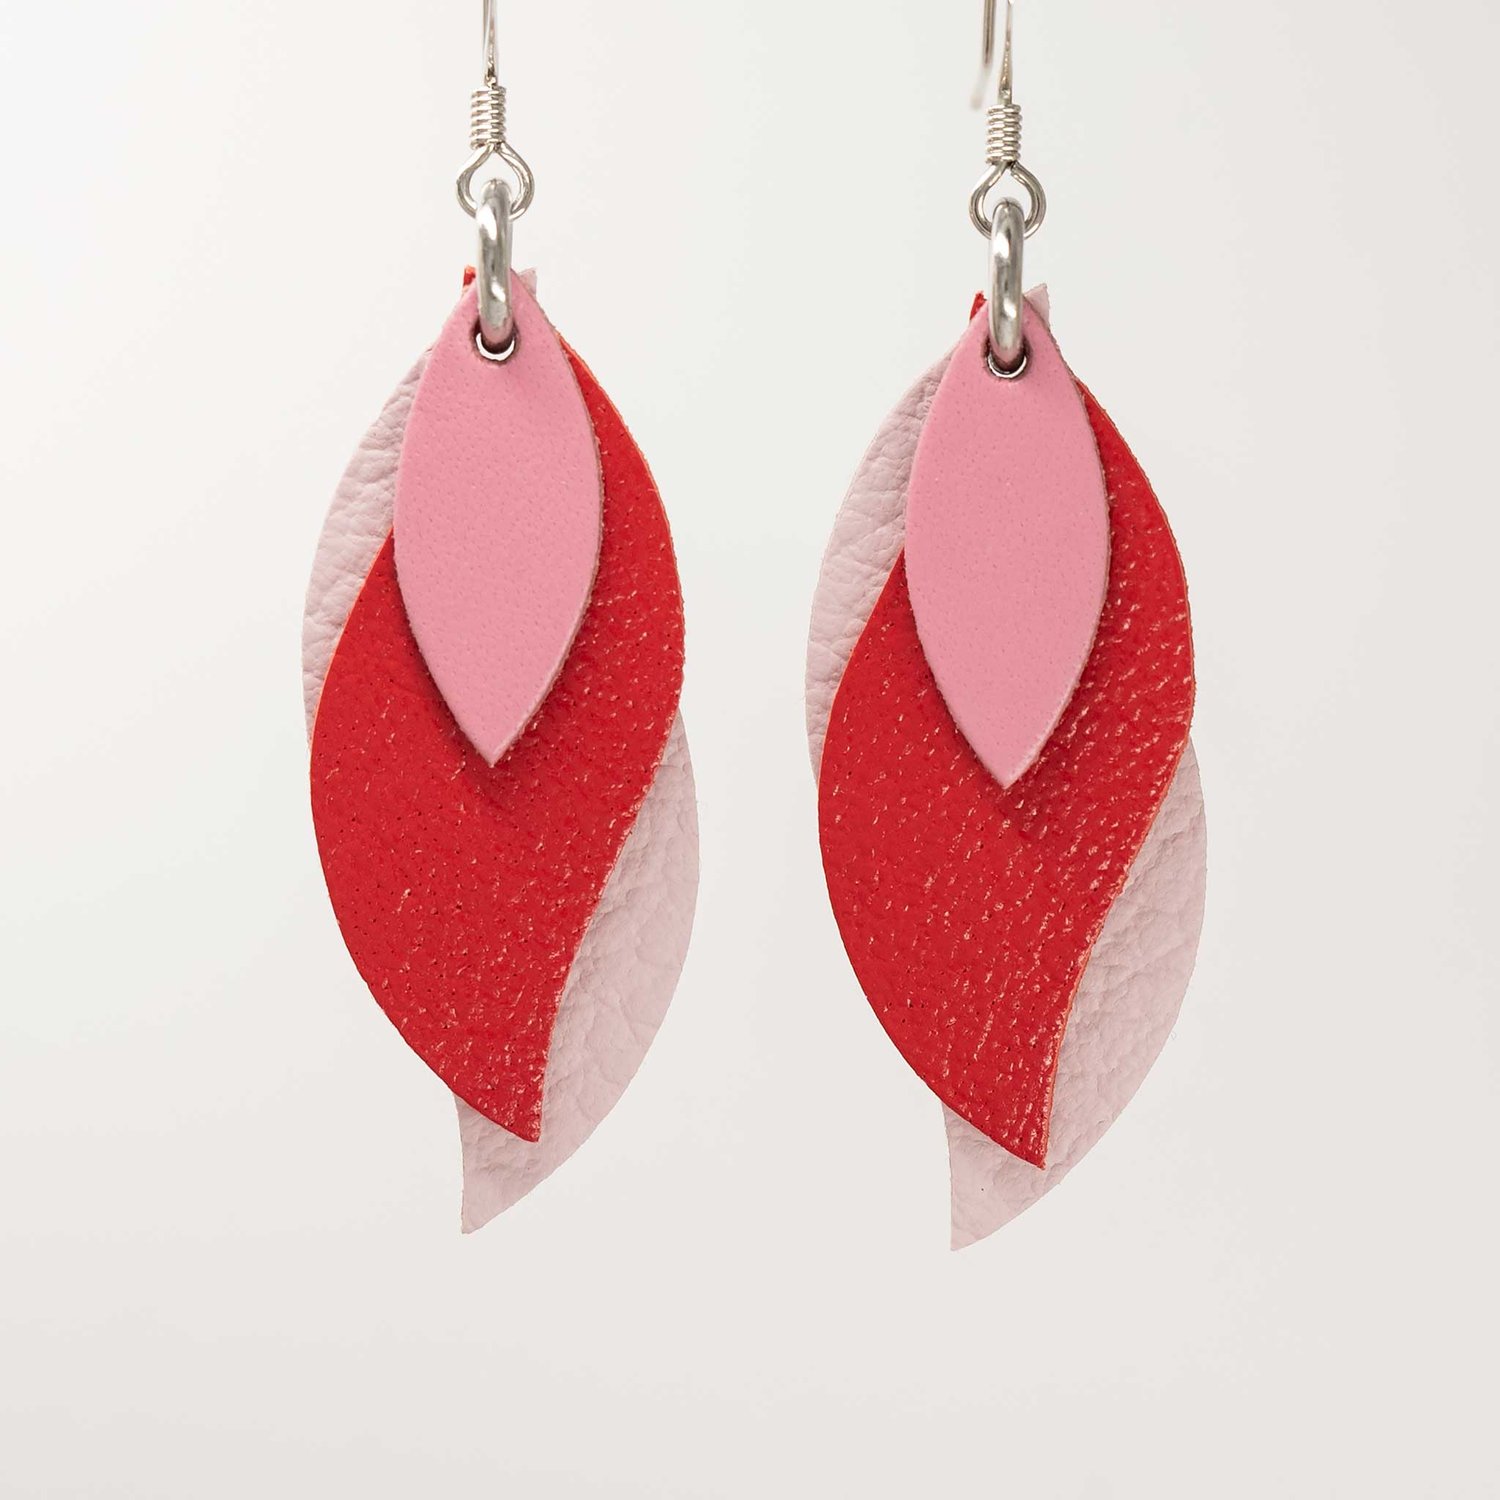 Image of Handmade Australian leather leaf earrings - Pink, glossy red, soft pink [LPR-153]